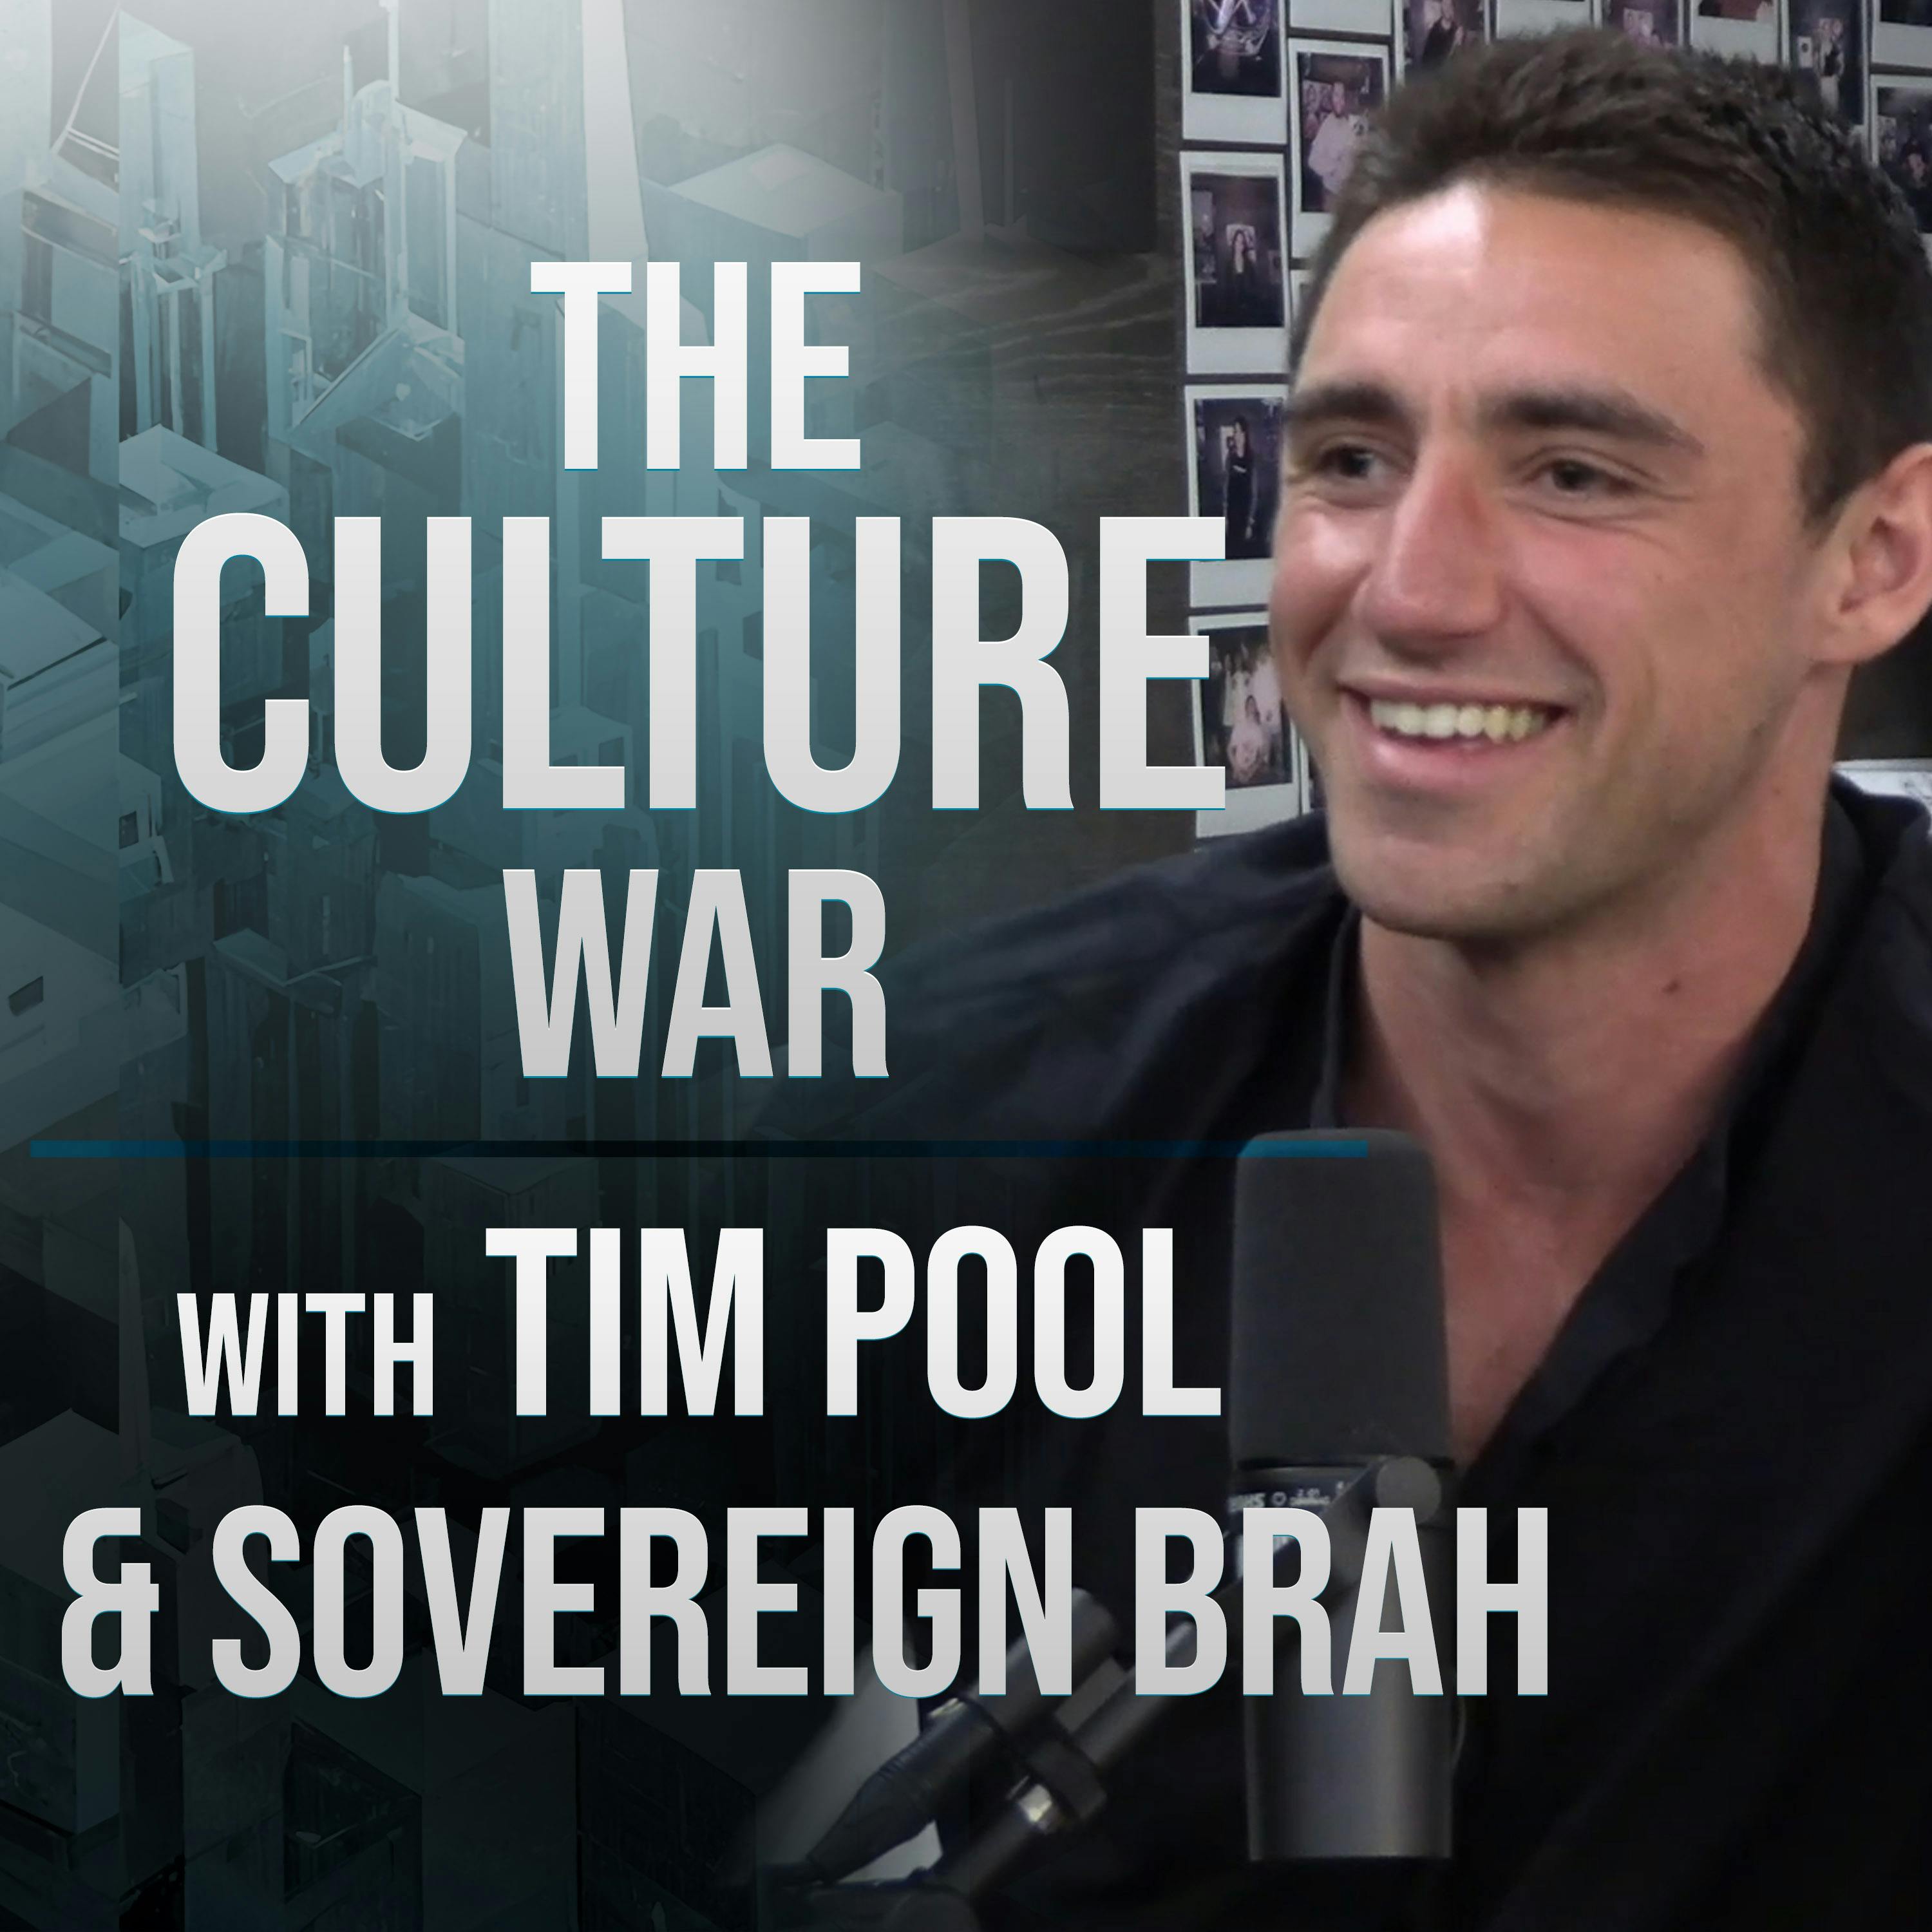 The Culture War #4  - Sovereign Brah, Roasting Only Fans Thots, Trump Called The Anti Christ